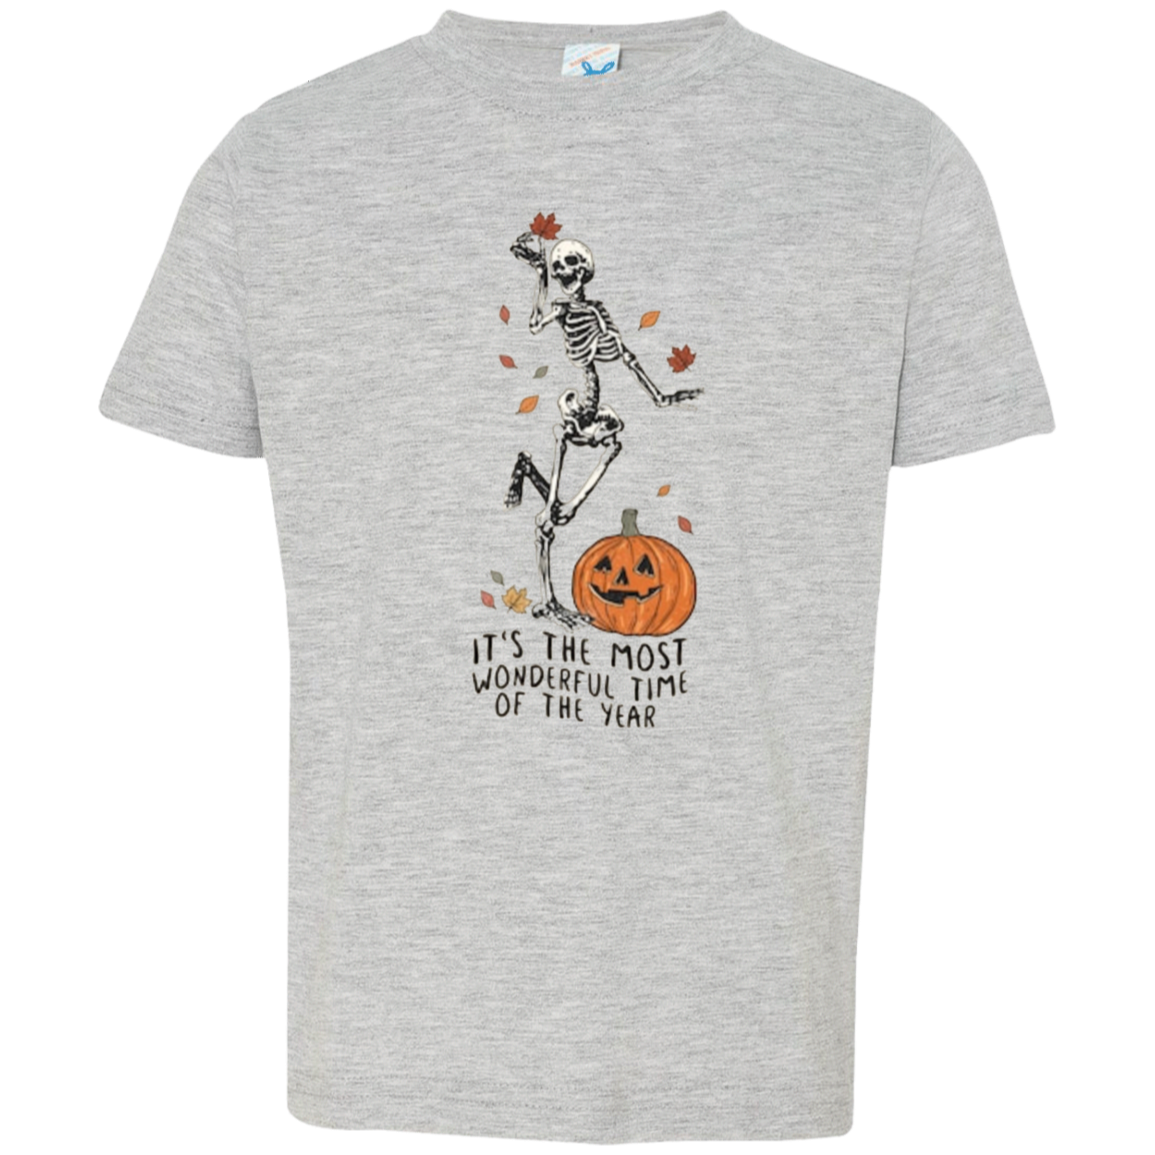 It's the most wonderful time of the year Kids Tee